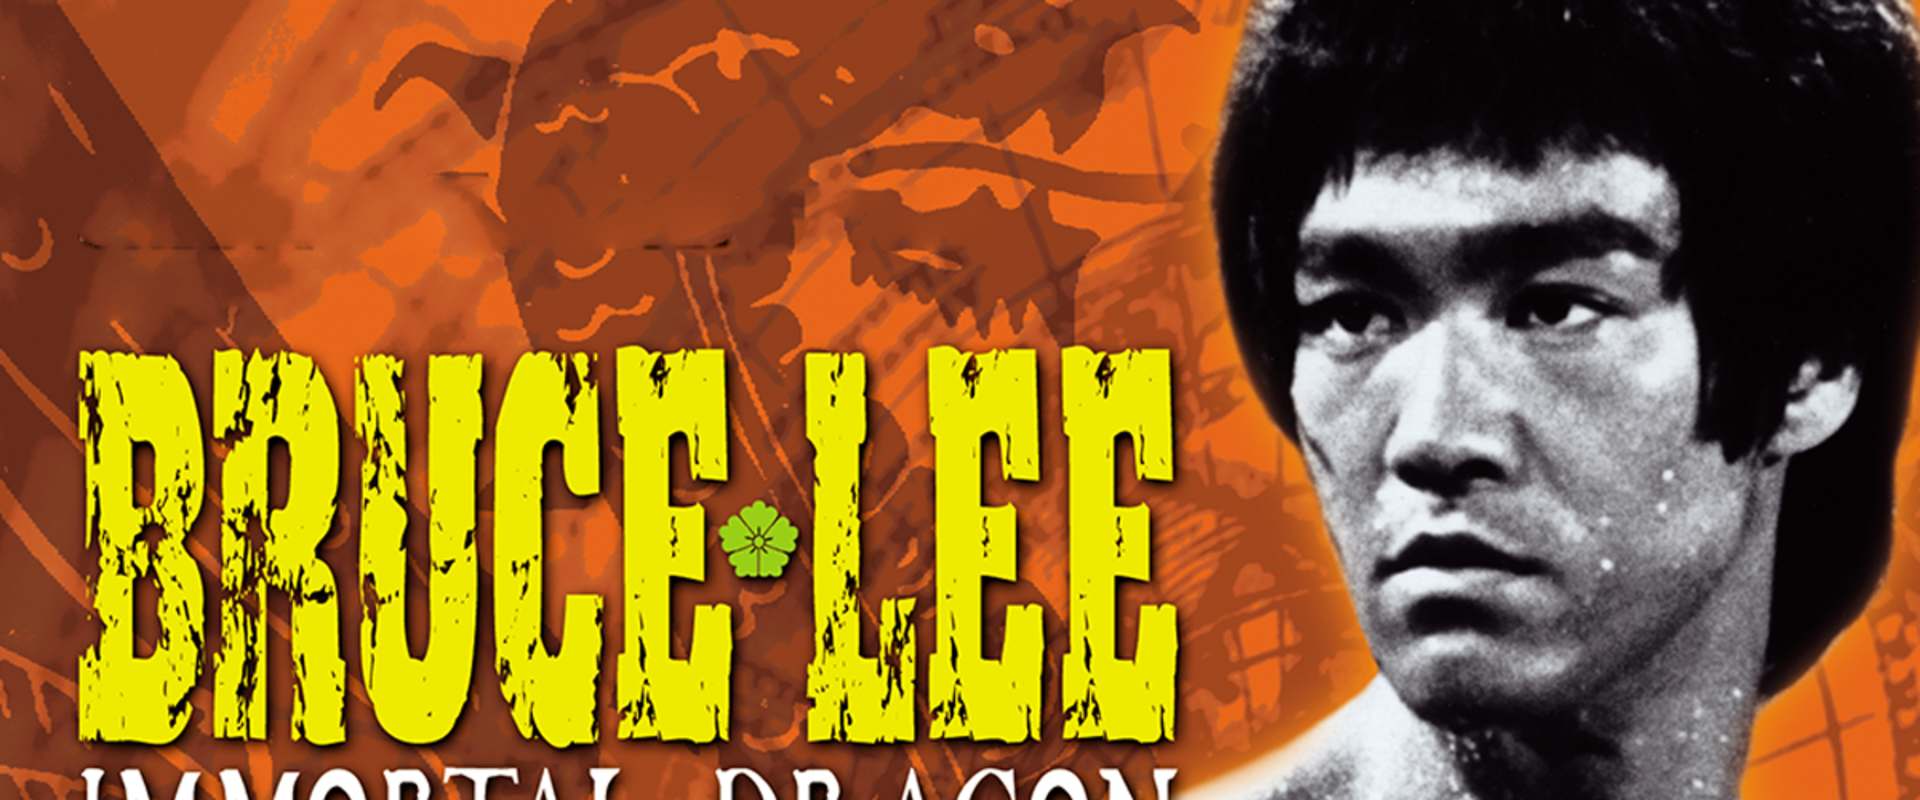 The Unbeatable Bruce Lee background 1